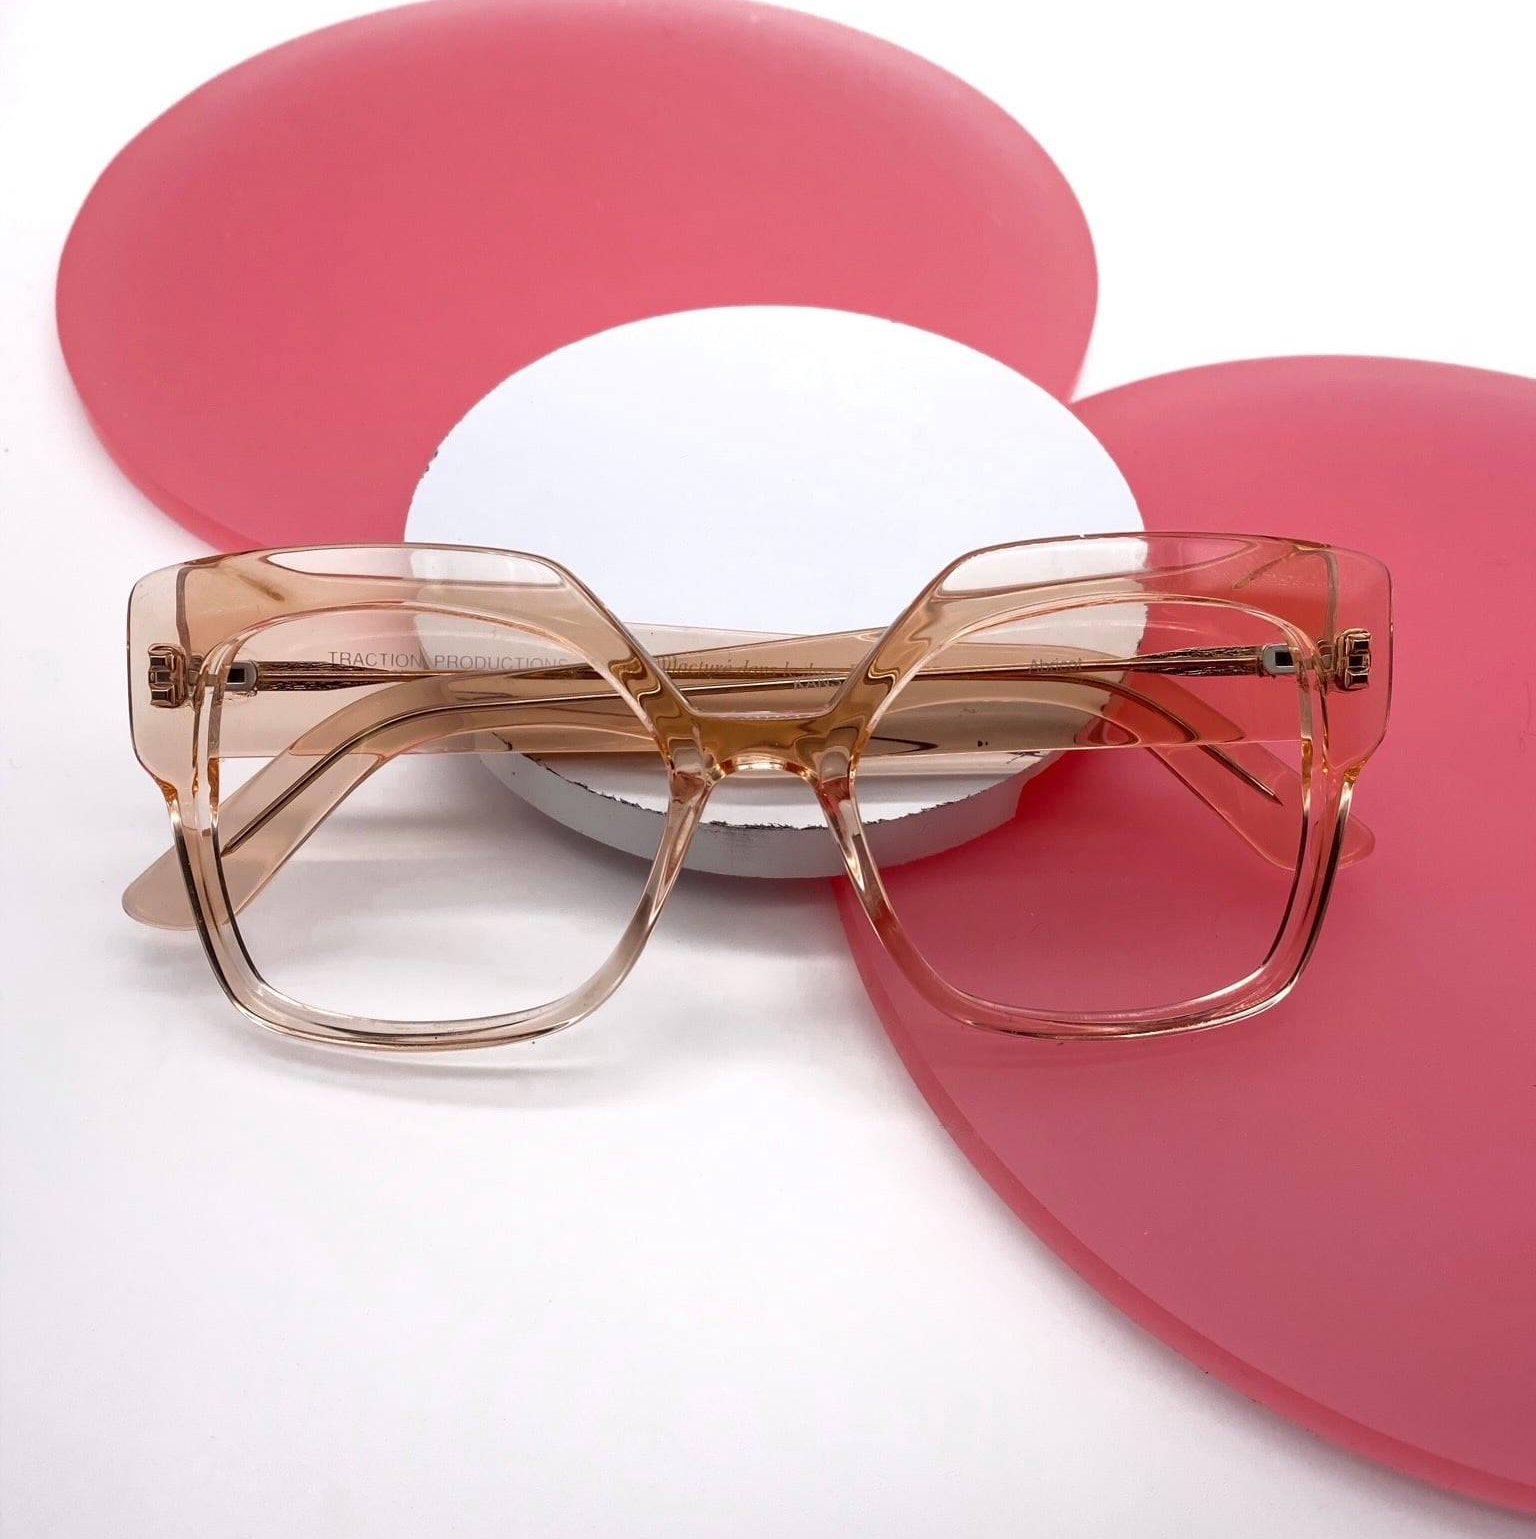 Translucent Traction Productions eyeglass frame on pink and white background